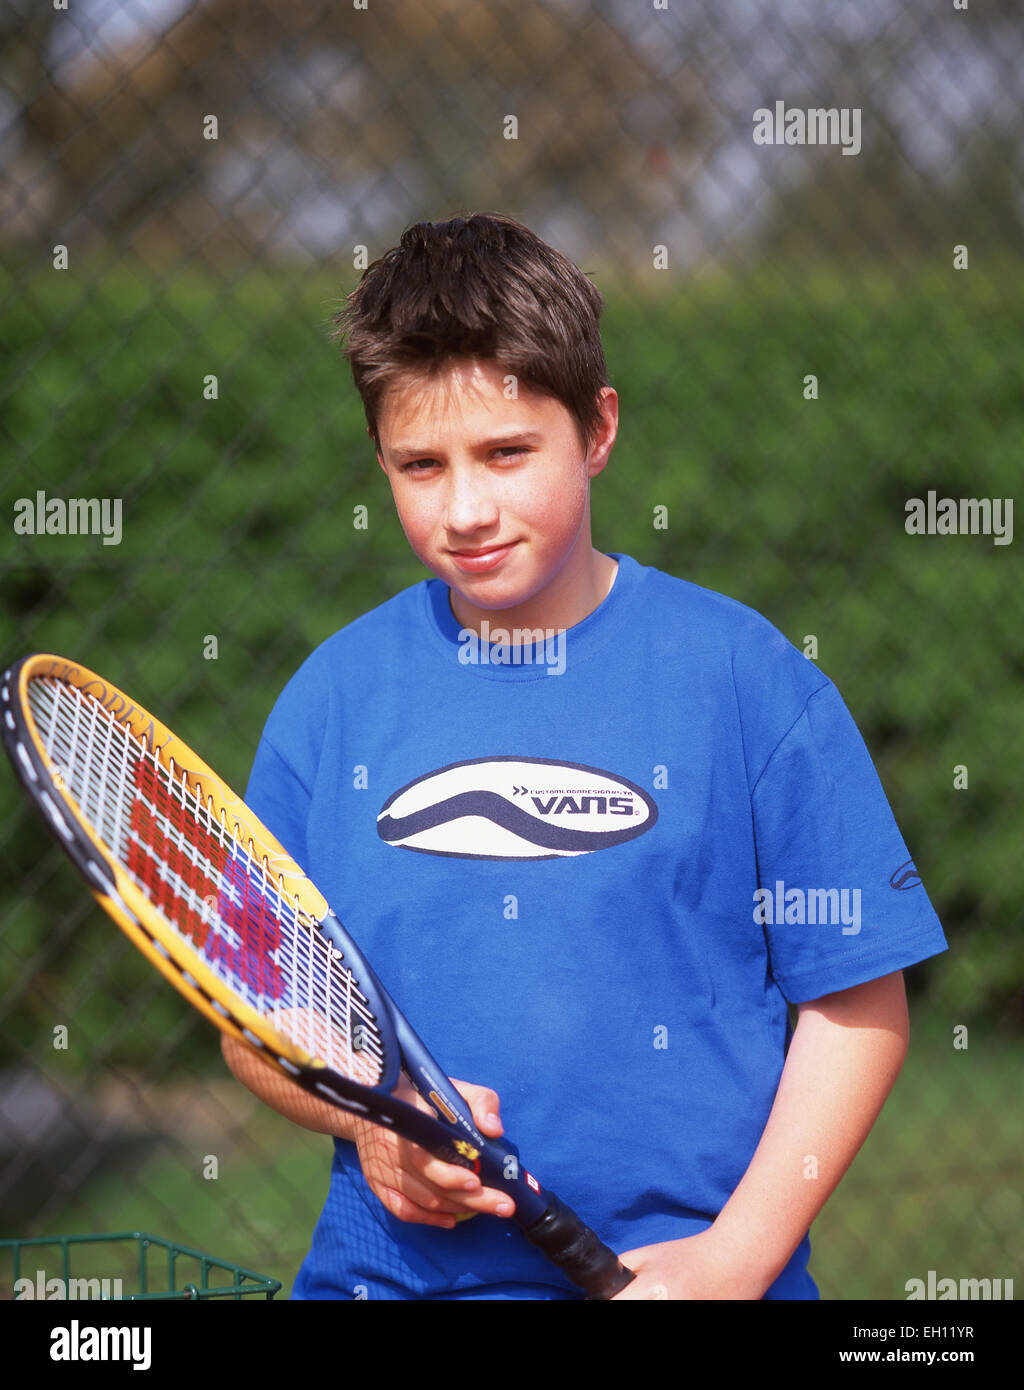 Teenage male tennis player, Twyford, Buckinghamshire, Angleterre, Royaume-Uni Banque D'Images